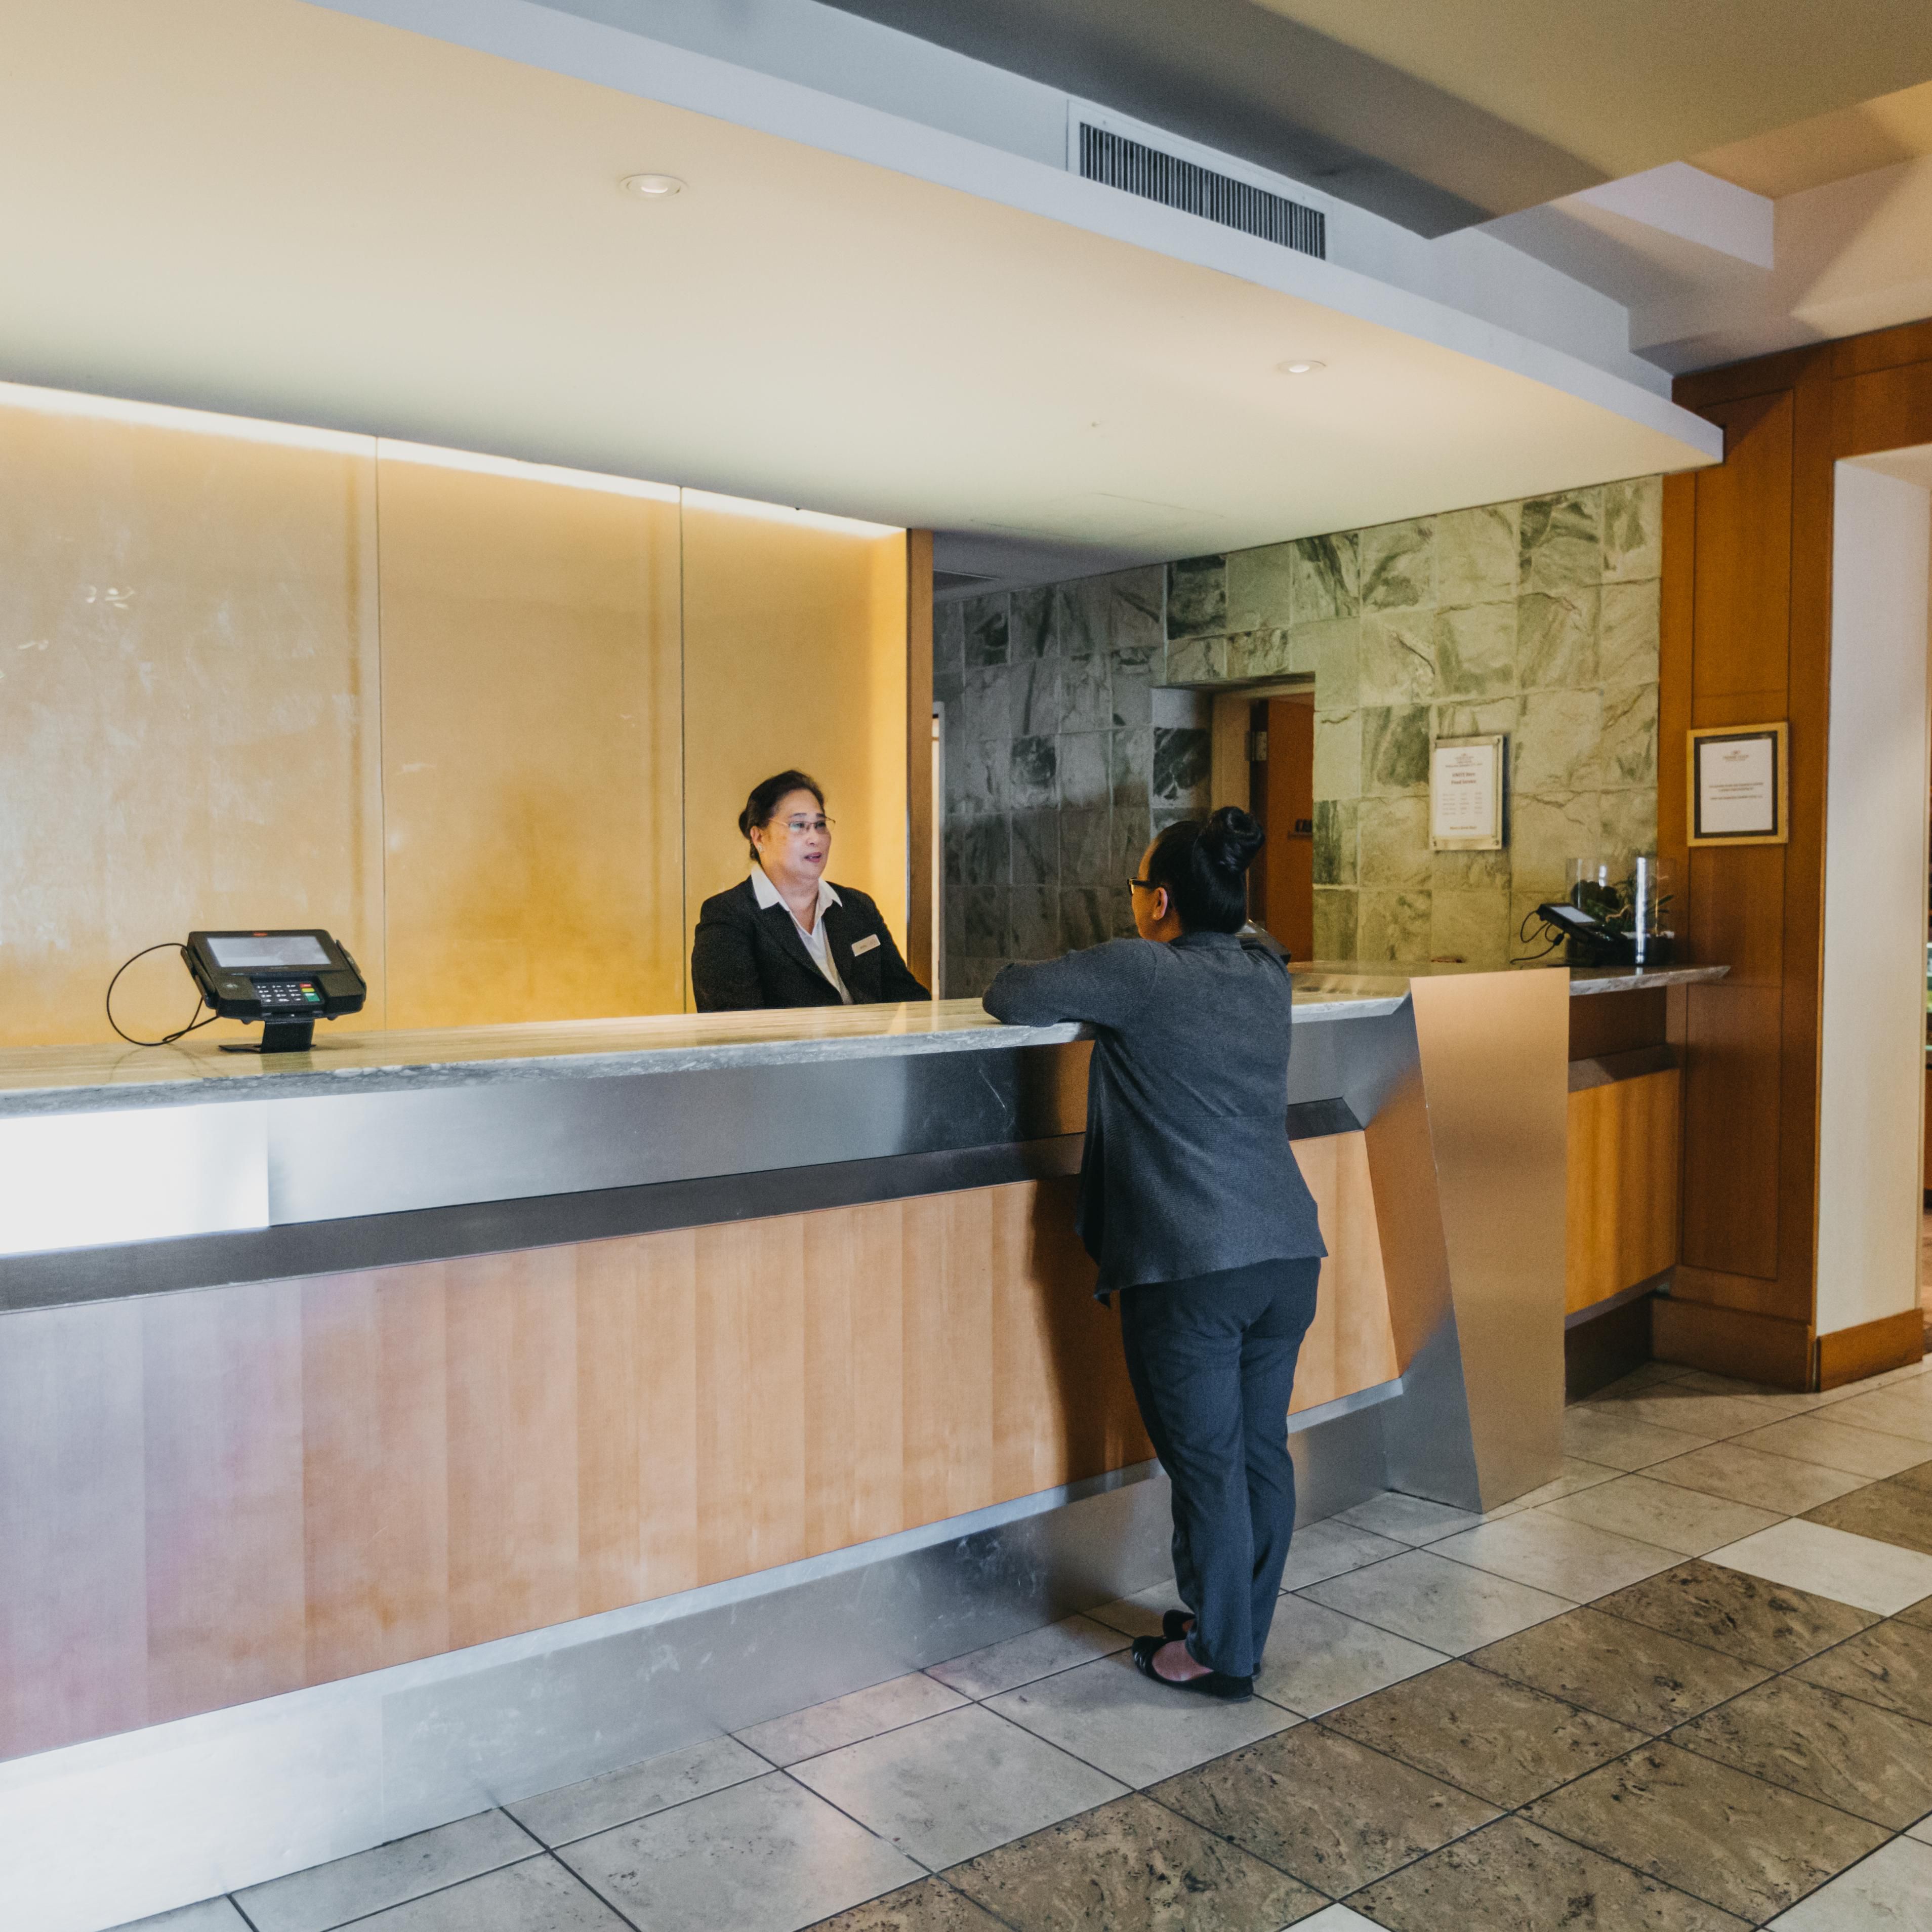 Welcome to the Crowne Plaza SFO!